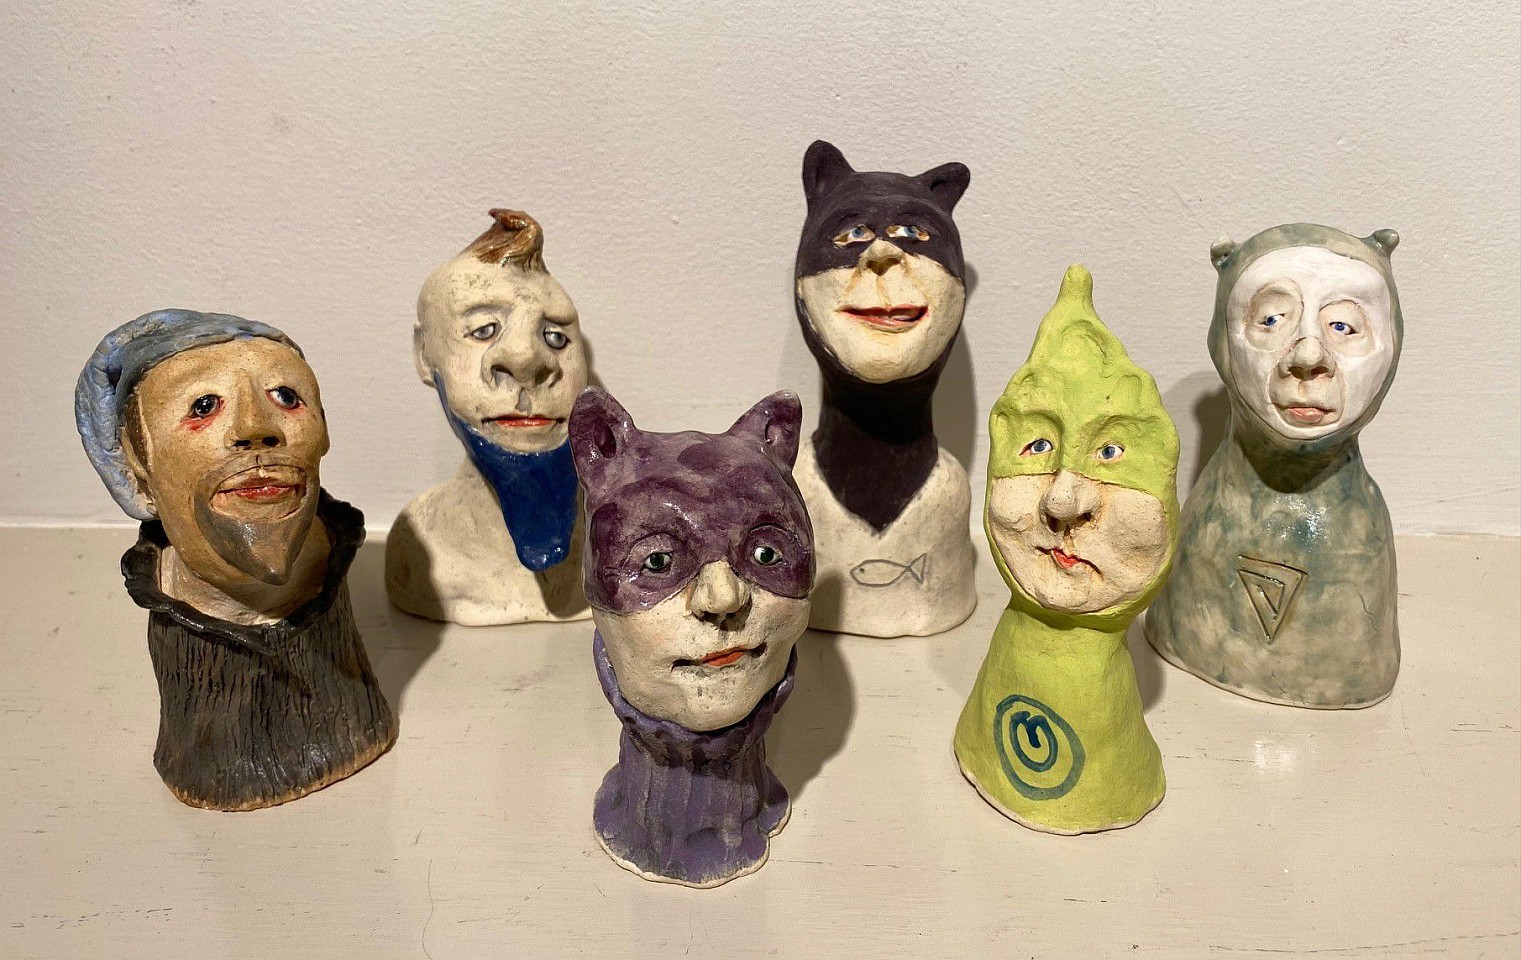 Jeanine Pennell, Characters Group 3
glazed ceramic, 4"" - 6""
JCAC 6292.03
$175